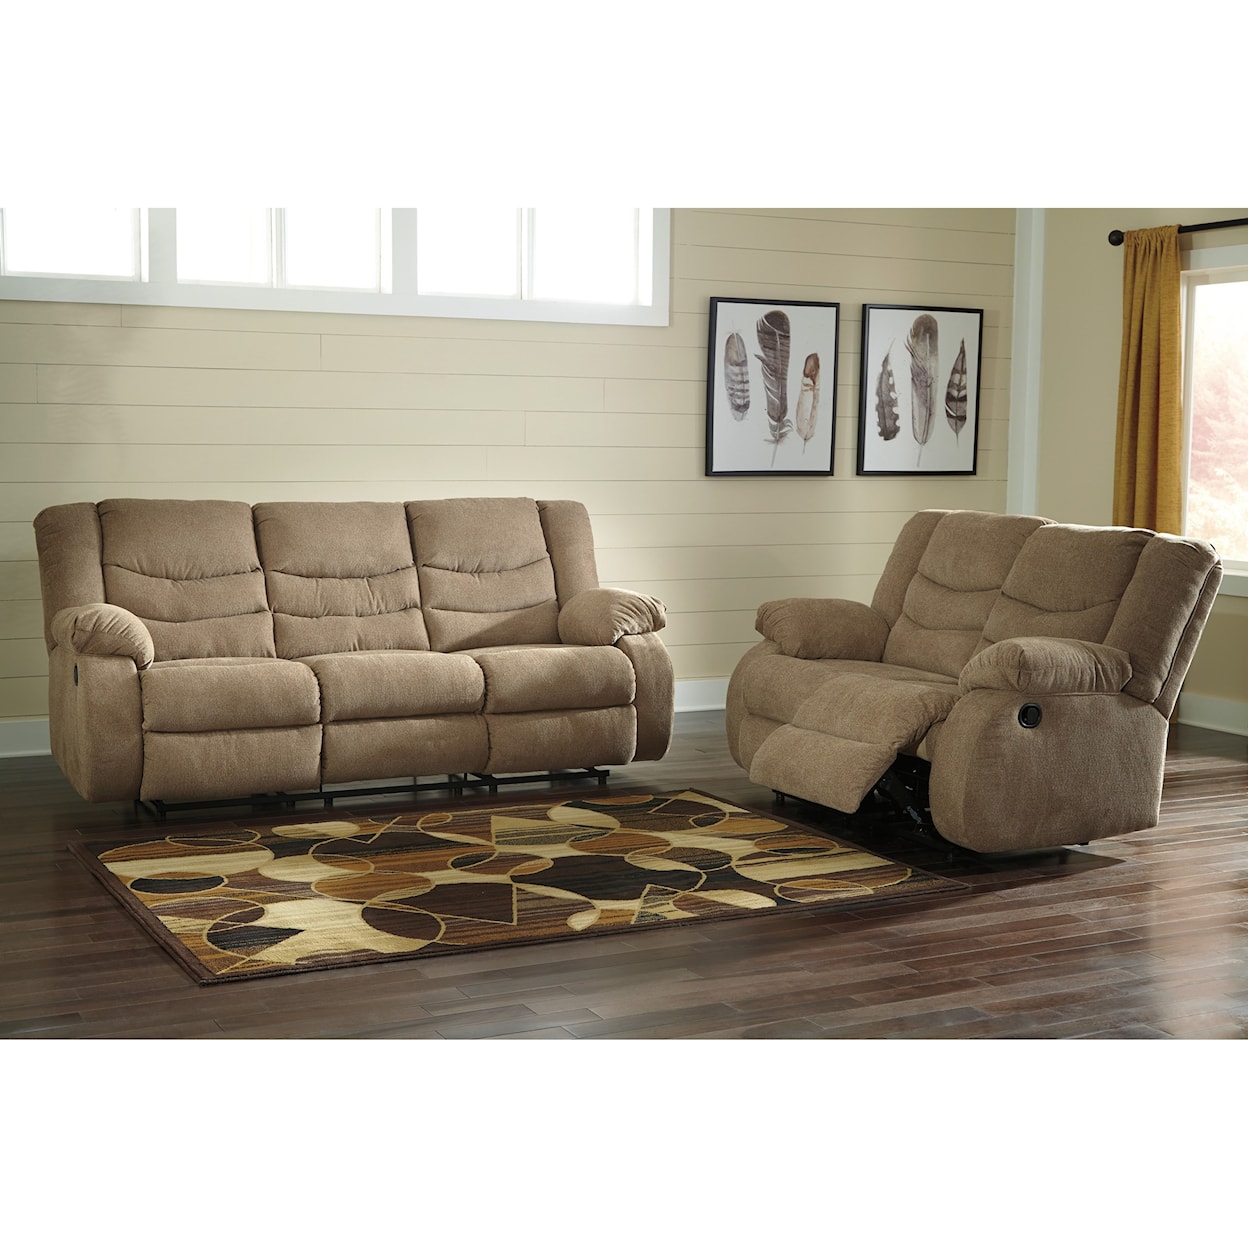 Signature Design by Ashley Tulen Reclining Living Room Group